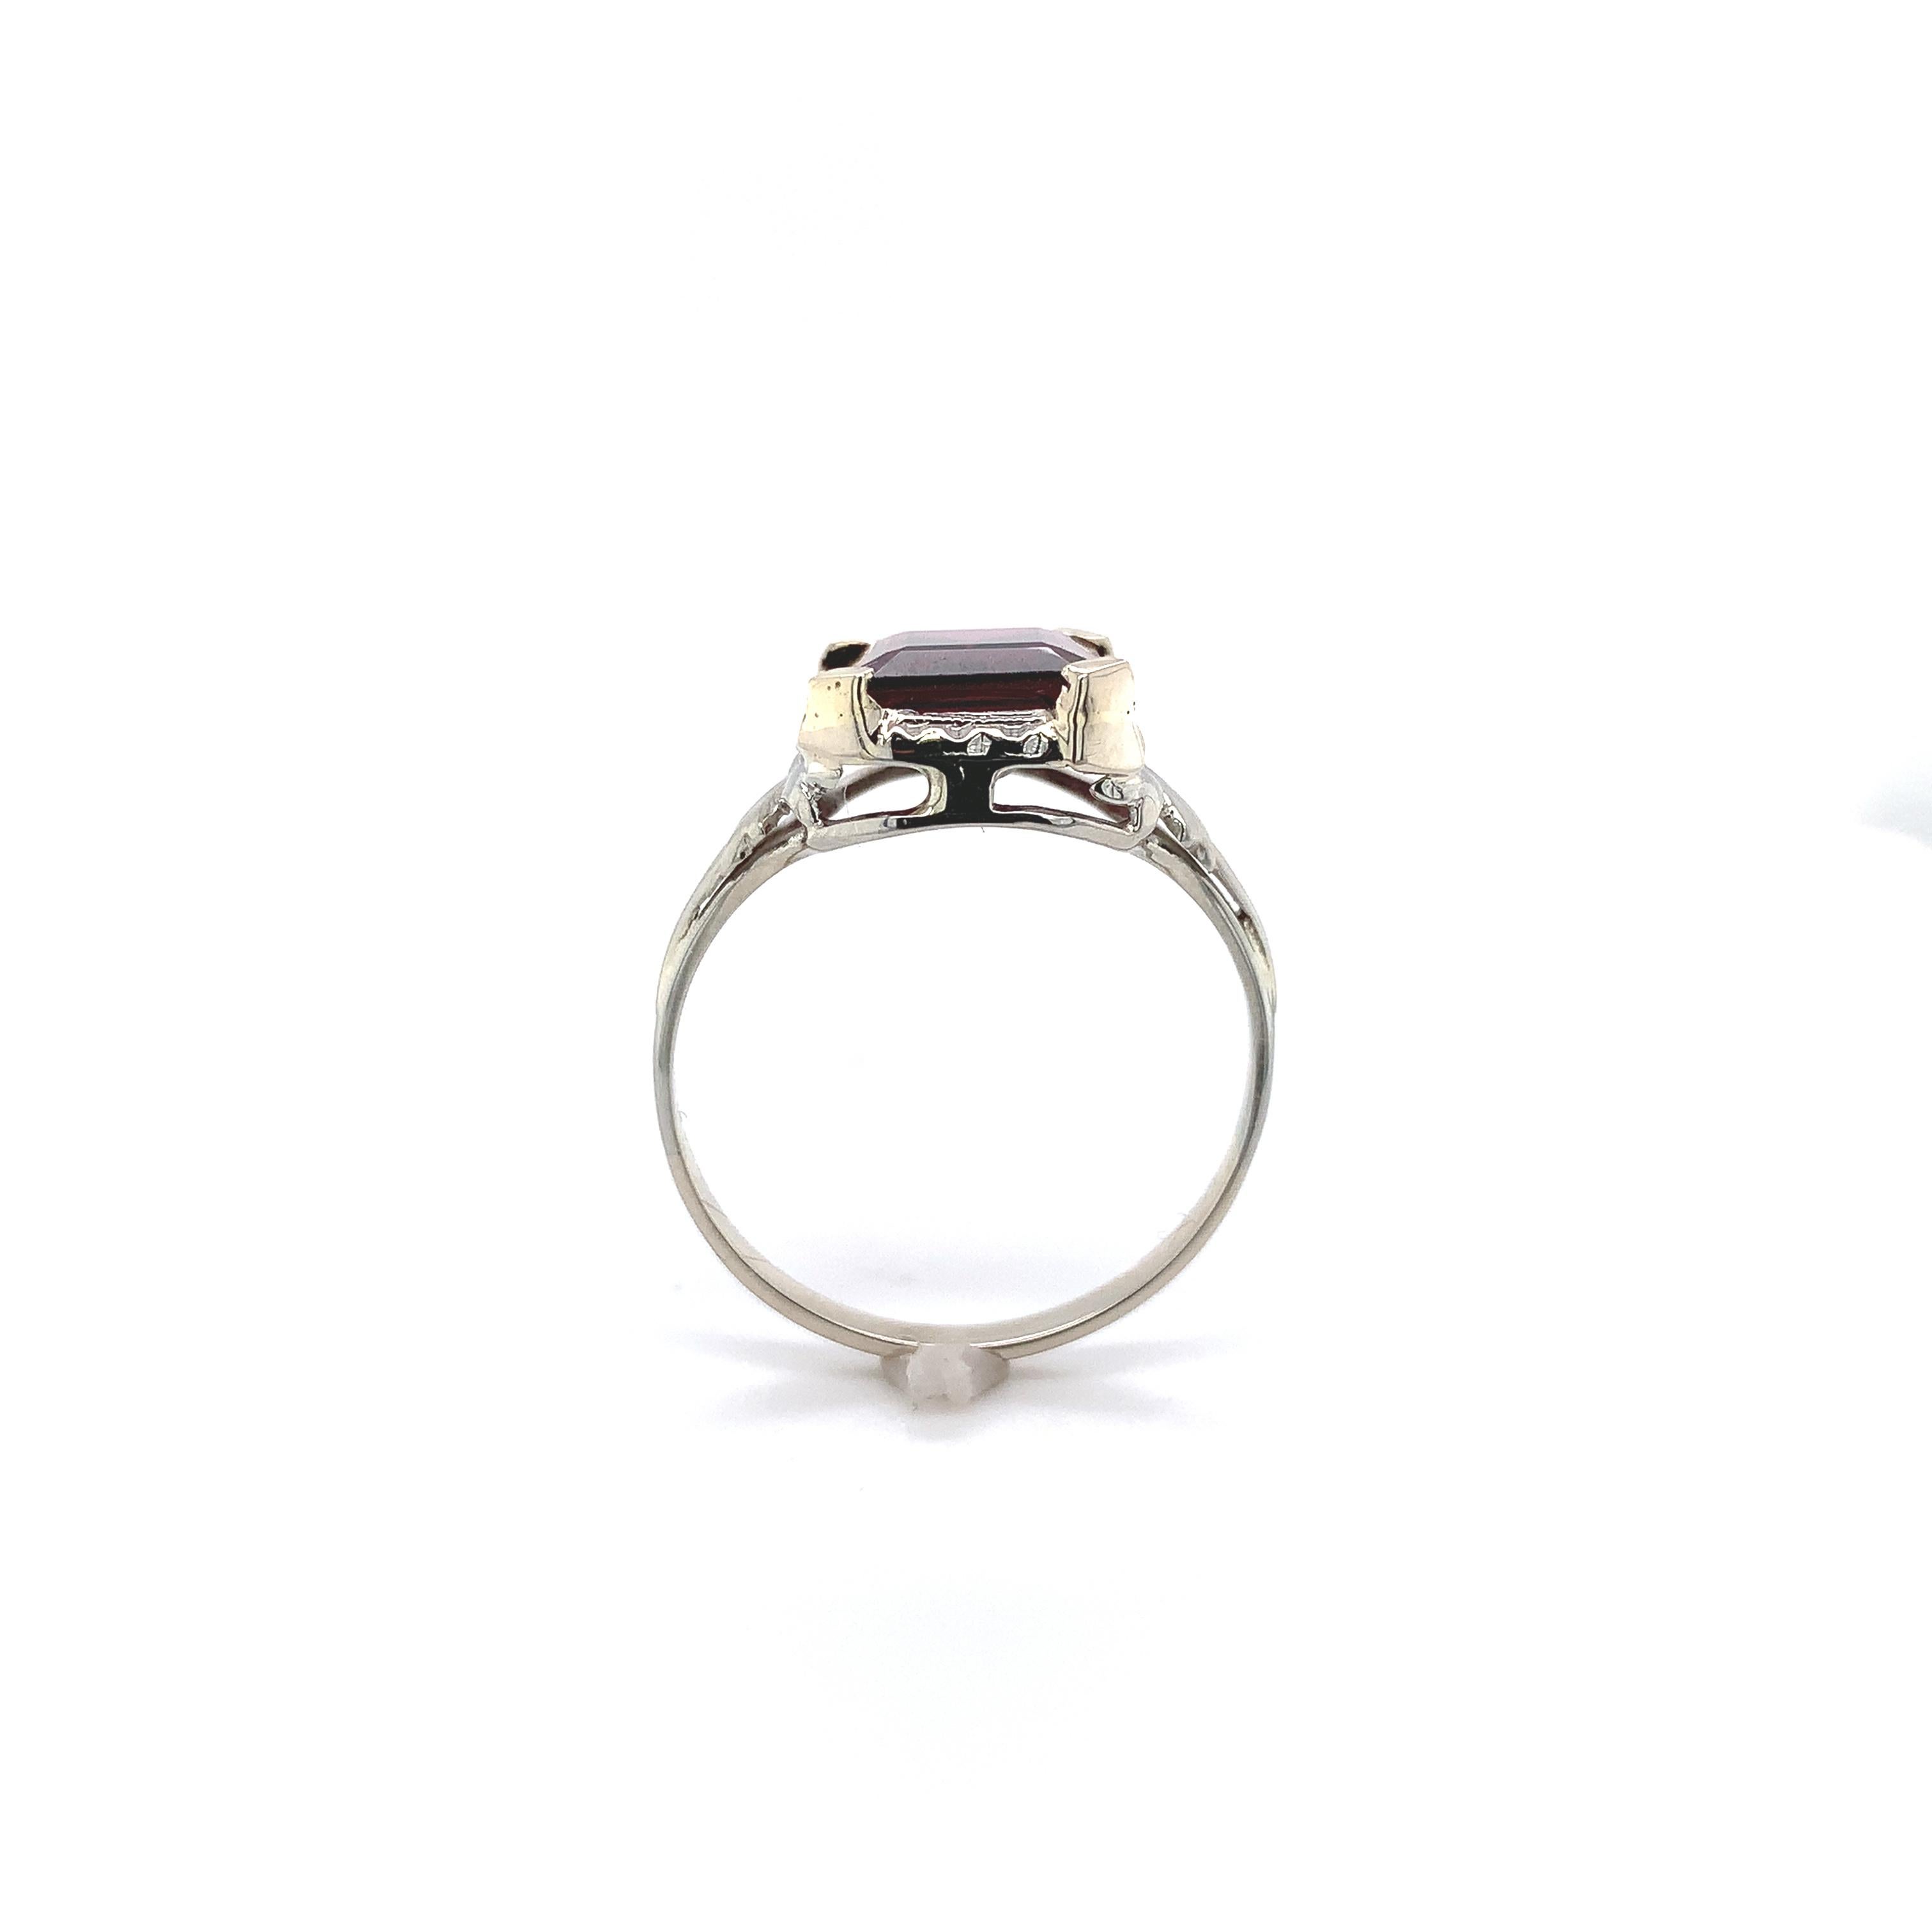 14K white gold ring set with an emerald cut rhodolite garnet weighing 3.90 carats. The very pretty raspberry colored garnet measures about 10mm x 8mm and has 4 new prongs. There is a border of hand engraved design. The ring fits a size 8 1/4 finger,